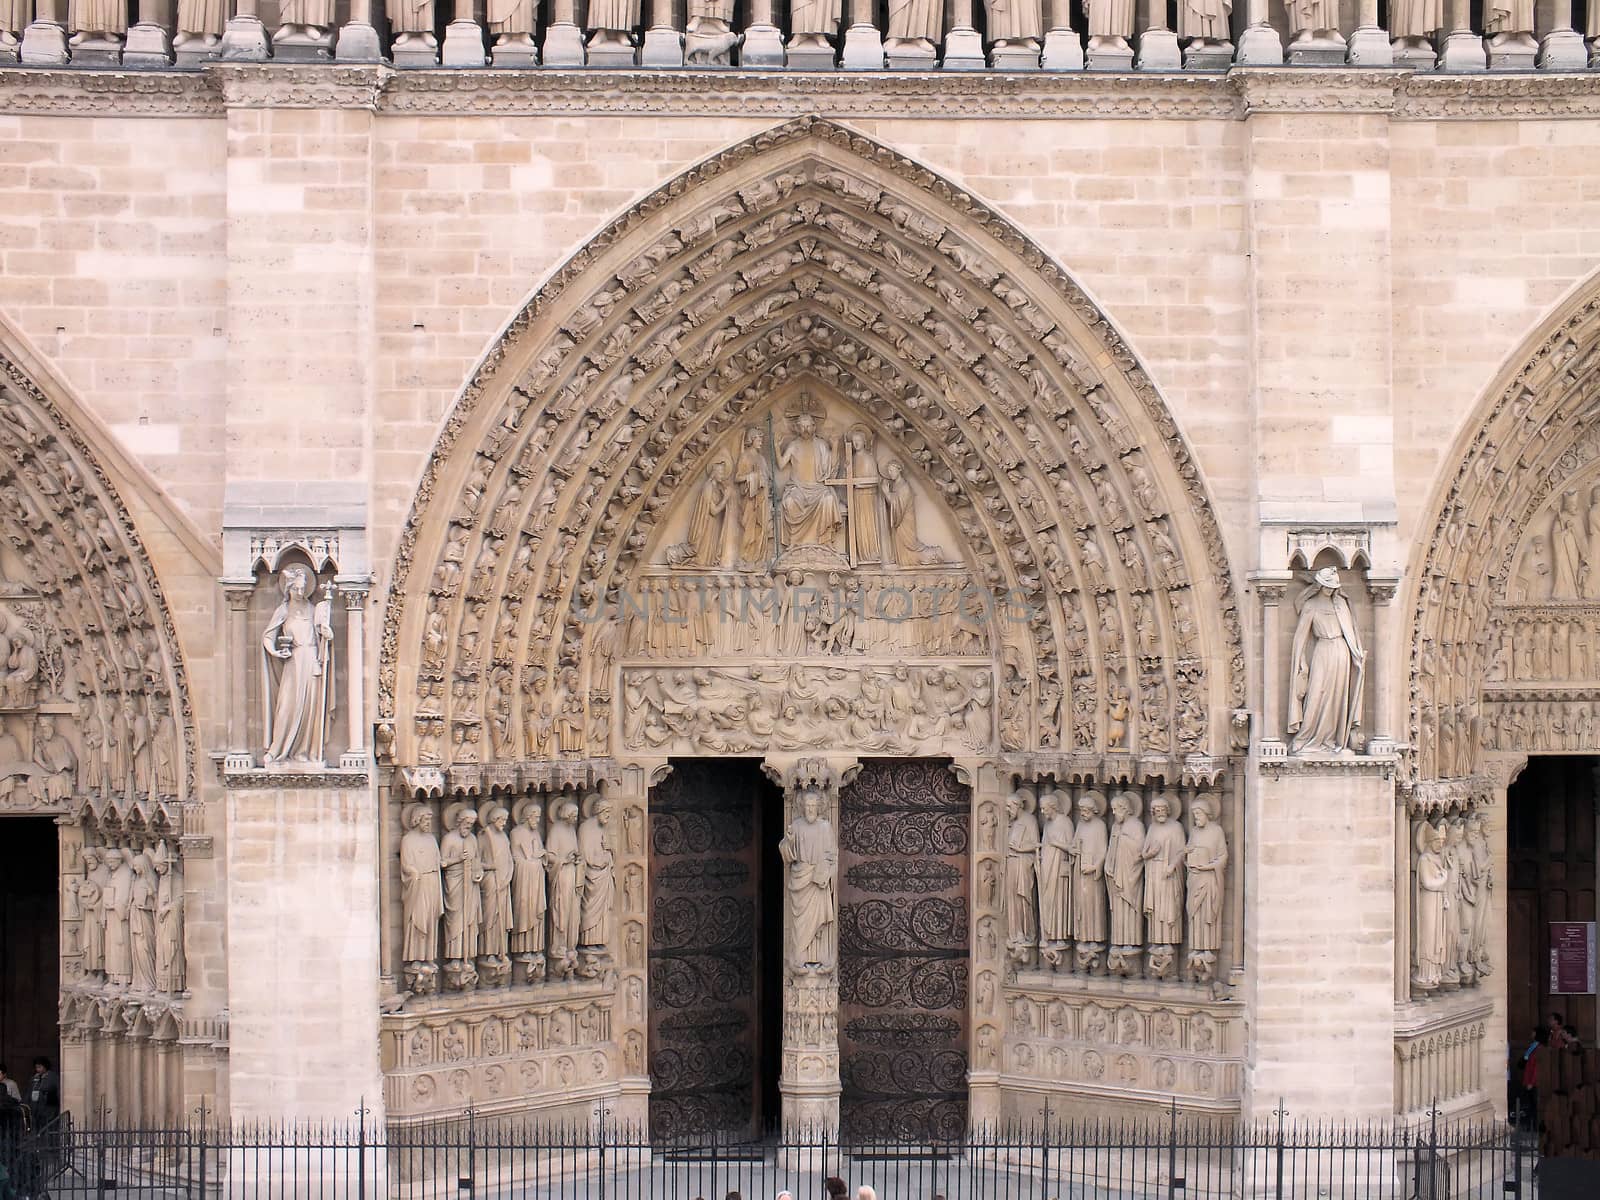 The western facade of Notre-Dame Cathedral including the main entrance was completed in 1225